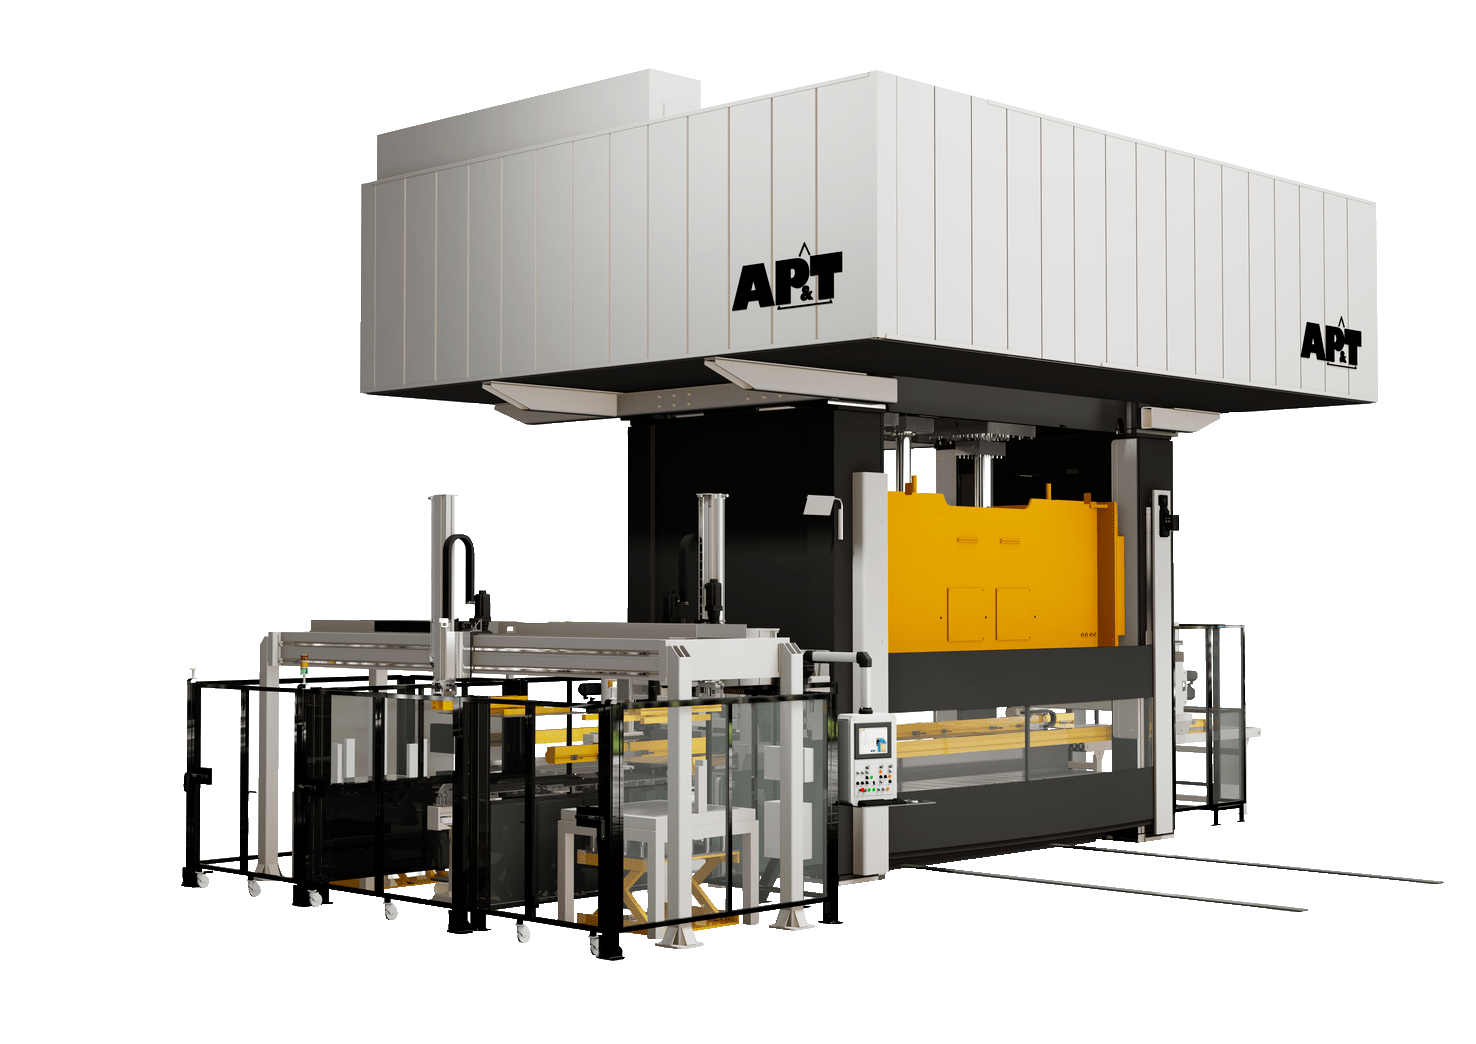 With high stroke frequency, full synchronization and compensation for off-center loads, AP&T’s servo hydraulic press is well suited to transfer solutions.